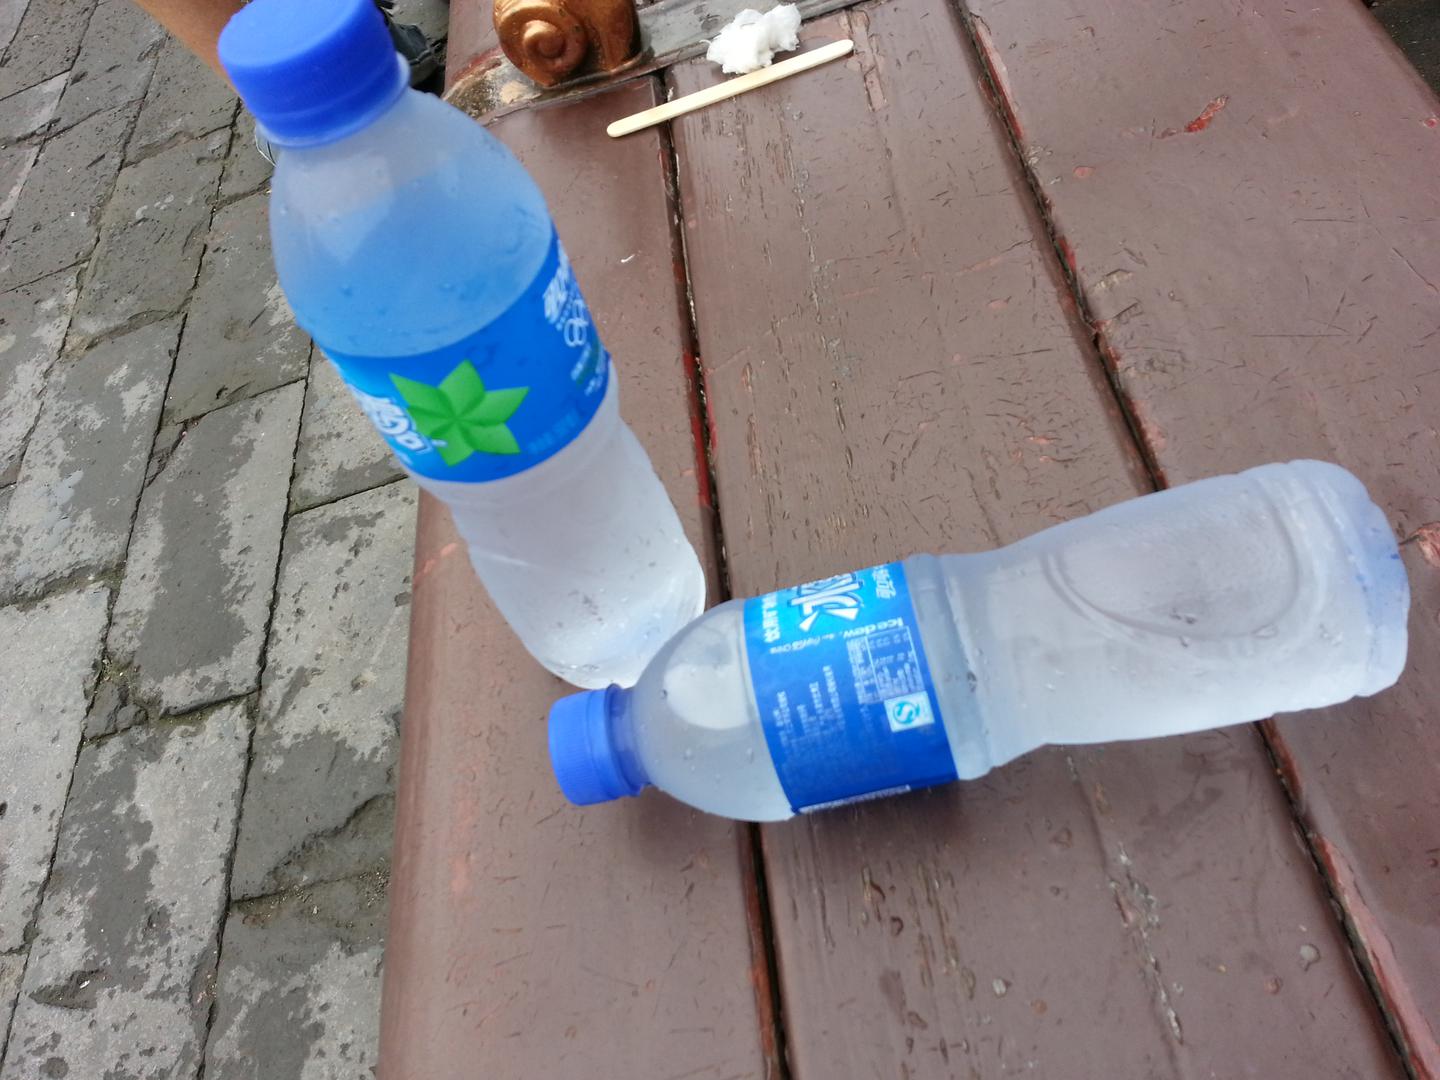 A bottle of cold water